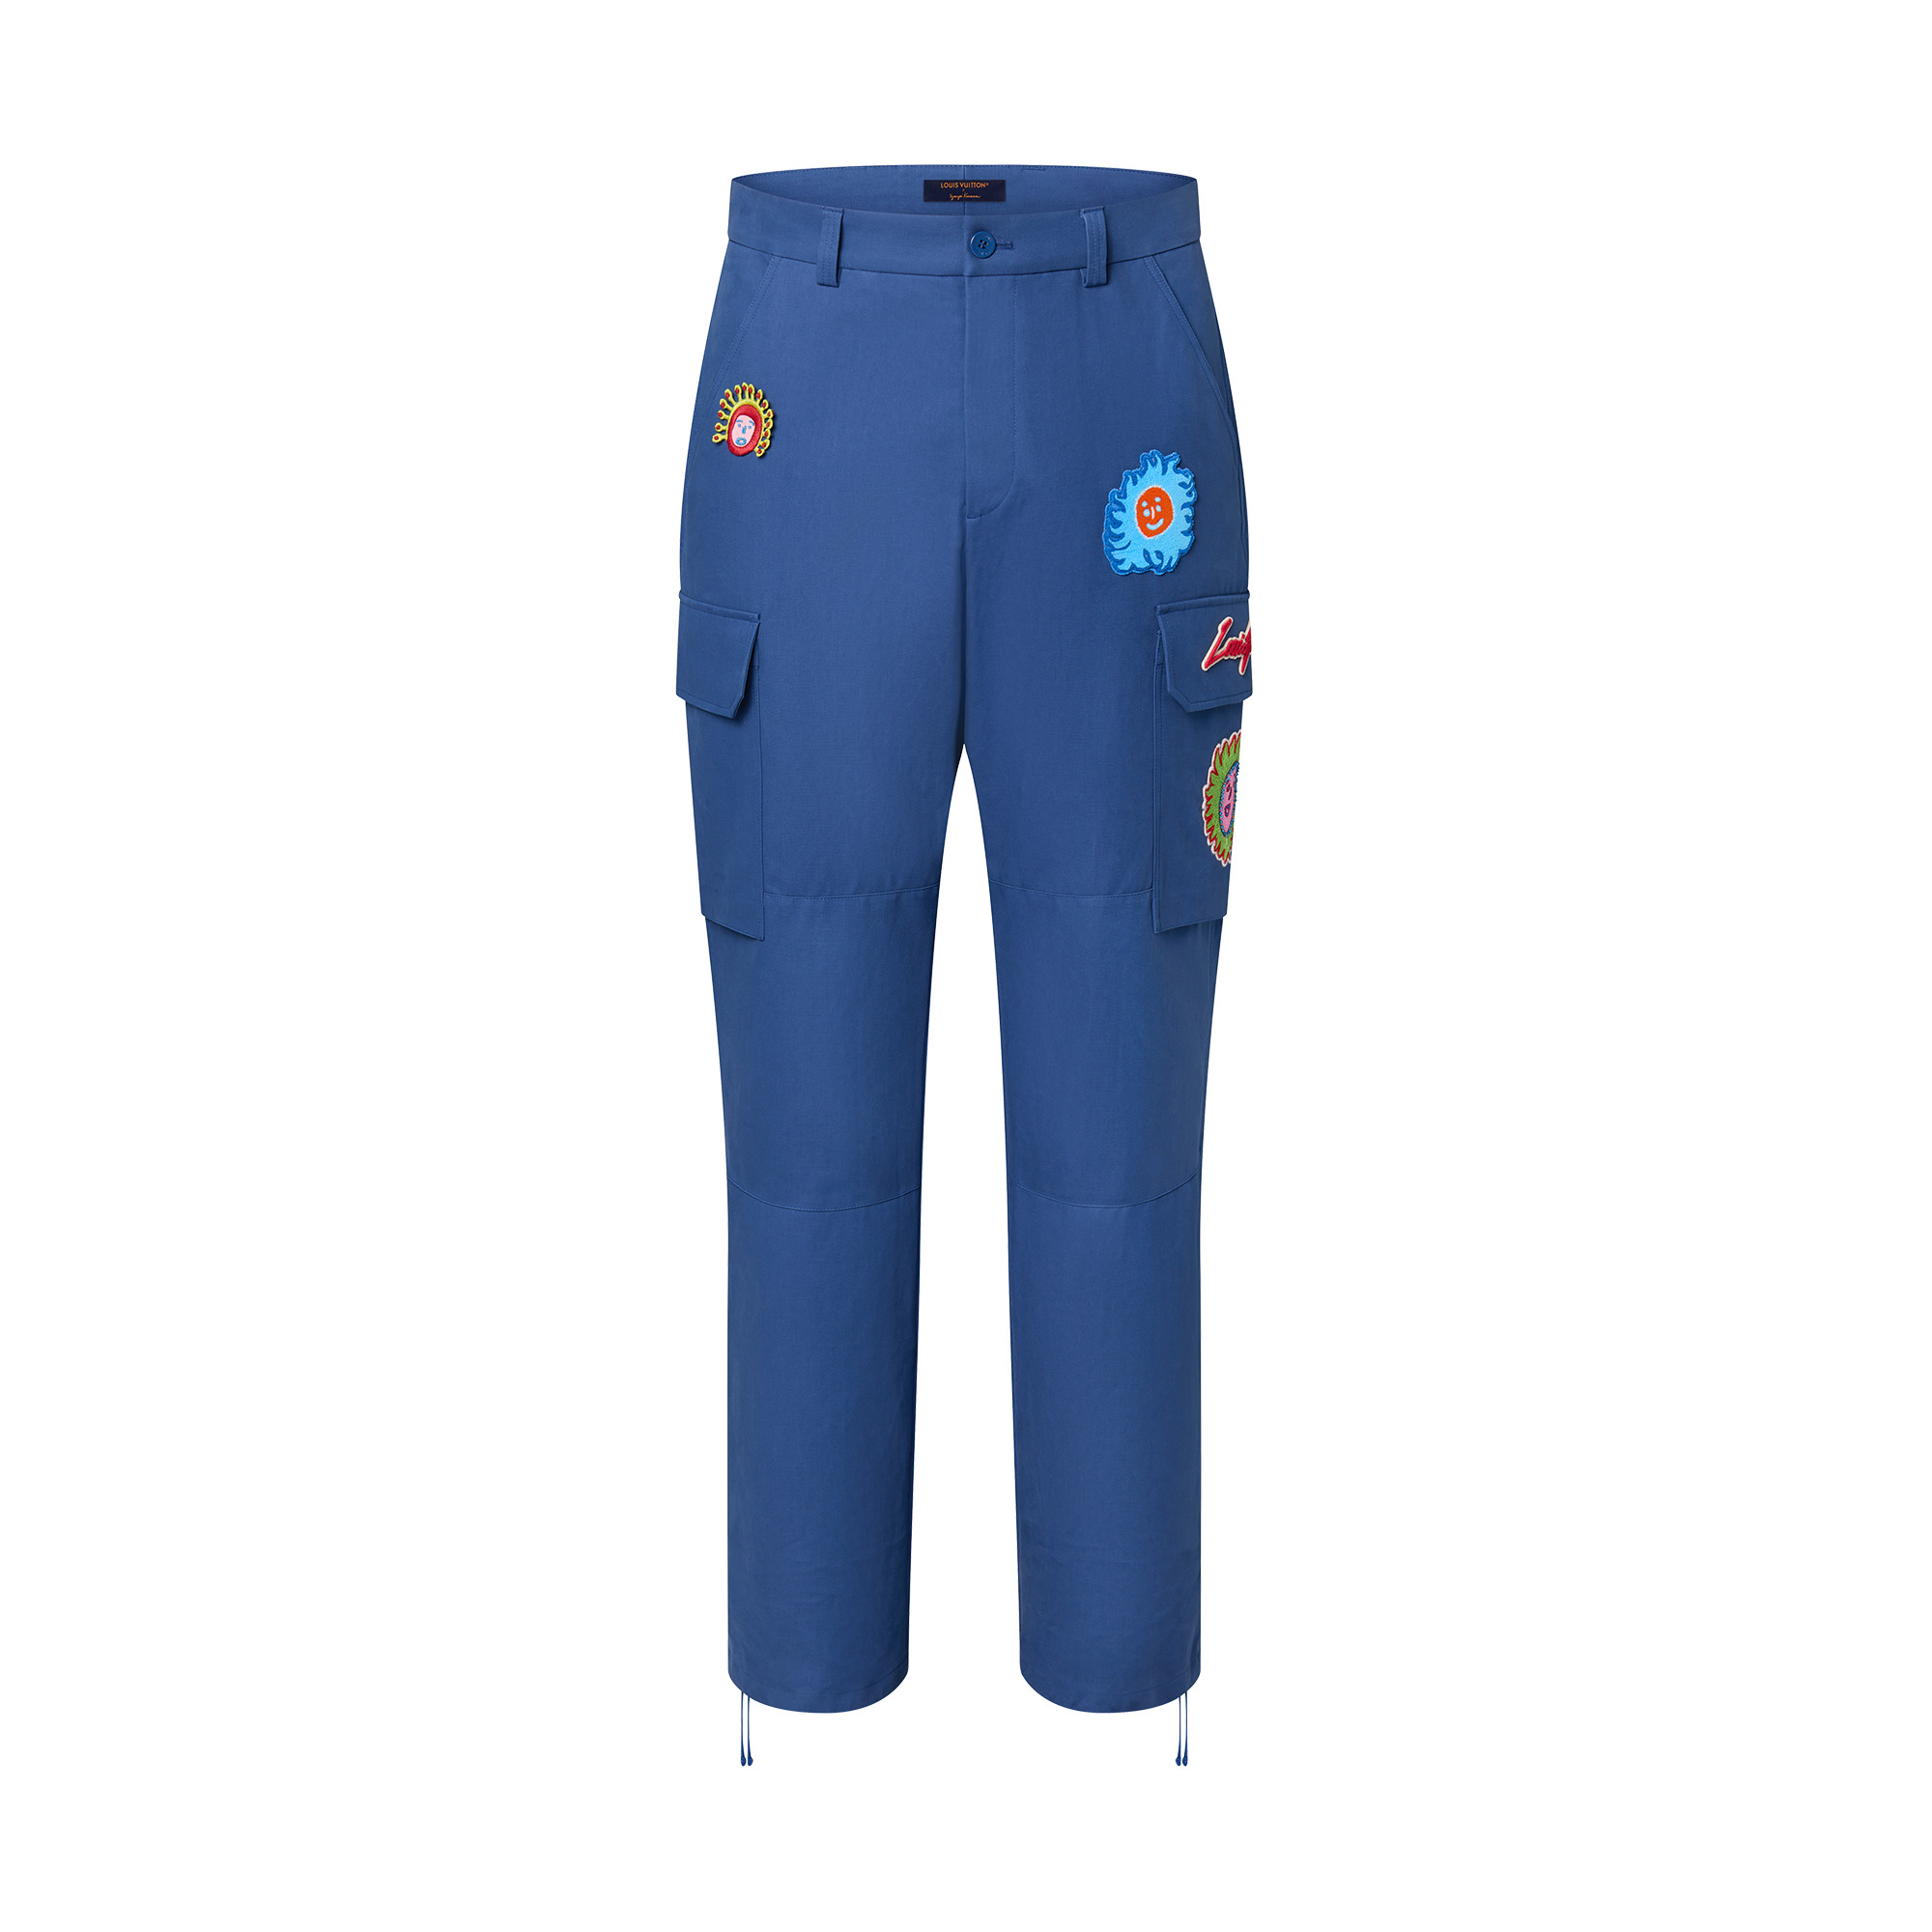 LV x YK Embroidered Faces Cargo Pants - 1